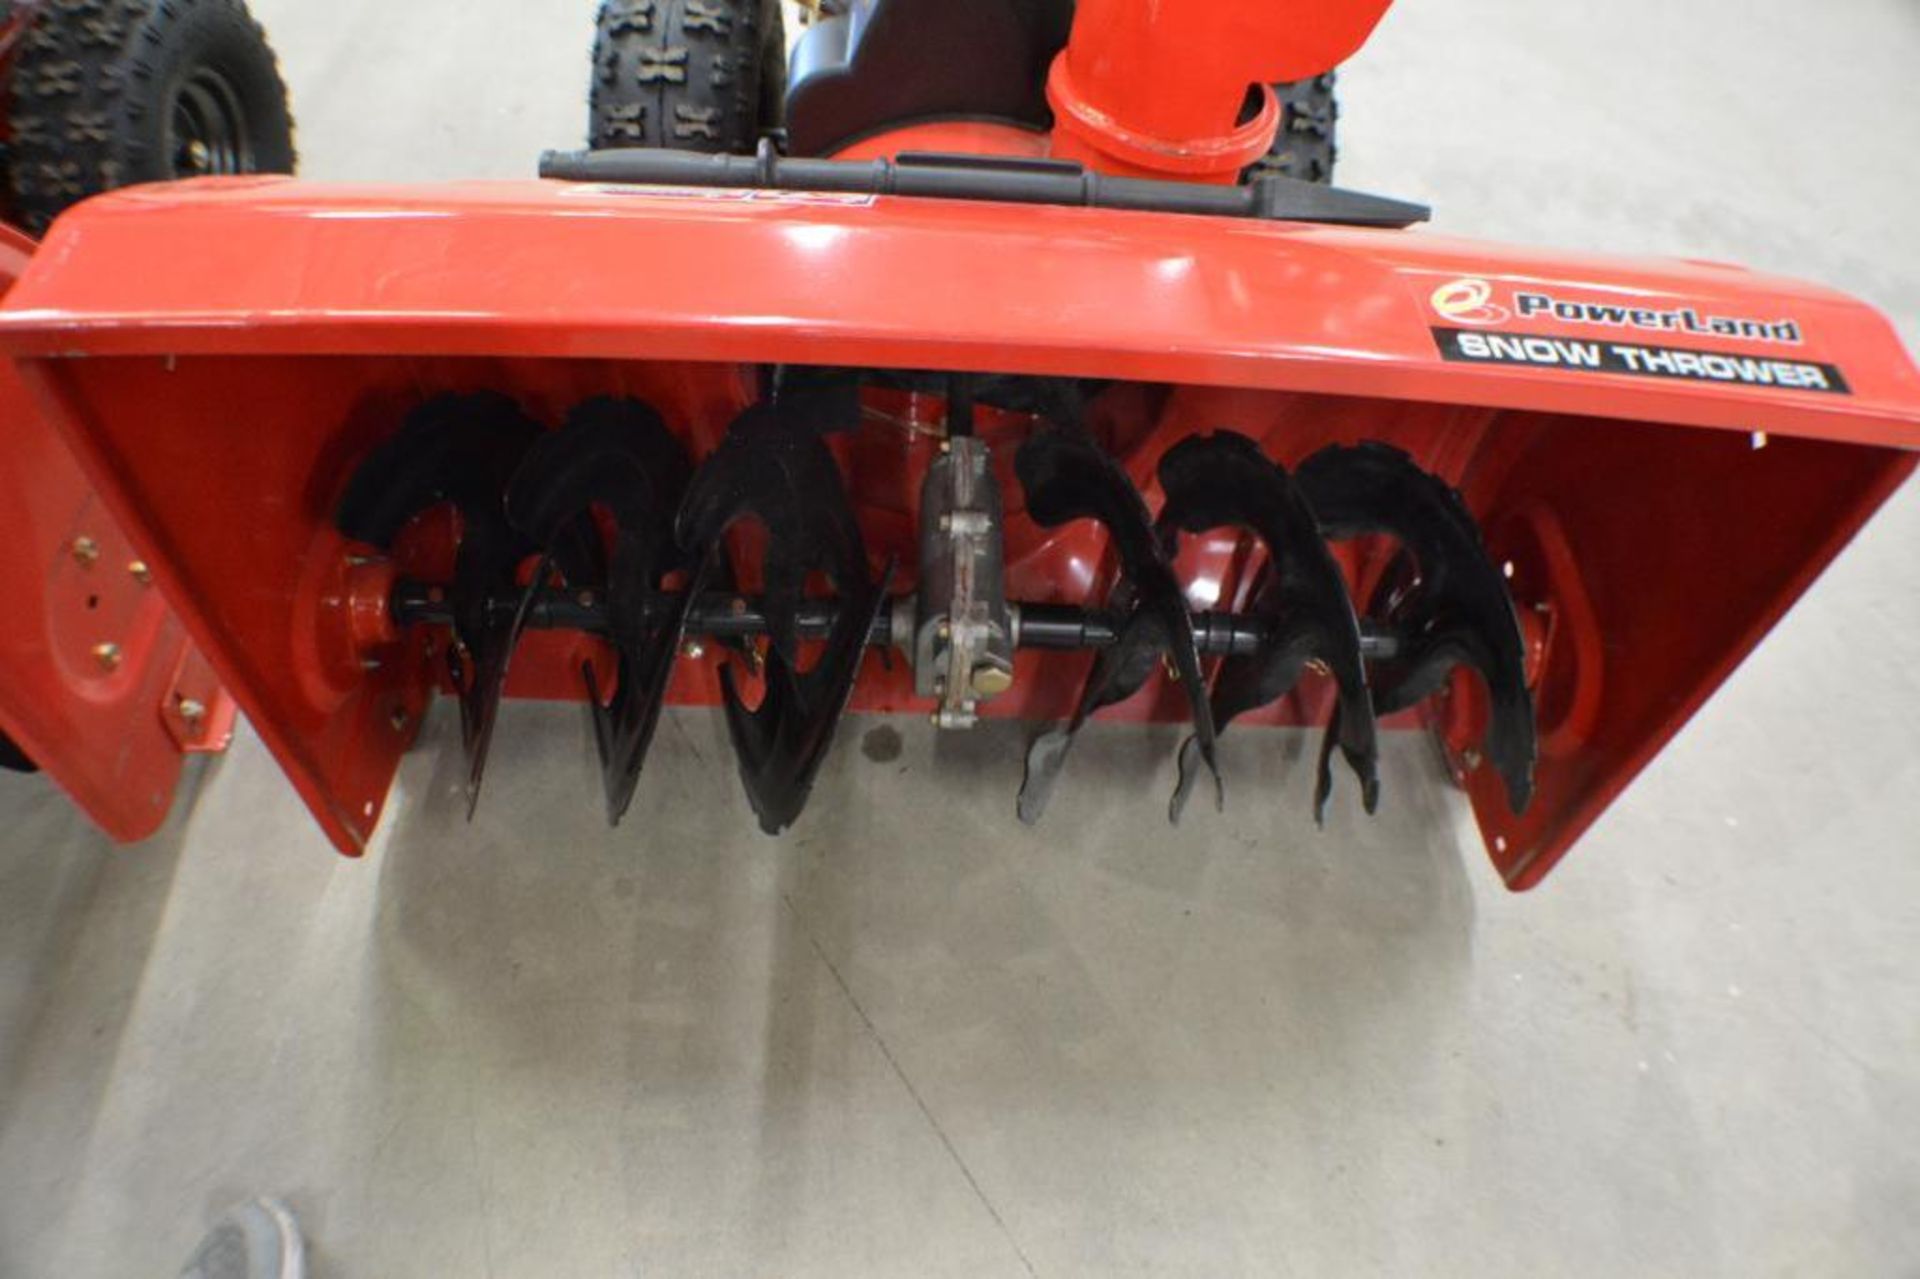 Snow Thrower 32in. 13HP with electric Start Engine 4 Stroke by Powerland - Image 3 of 8